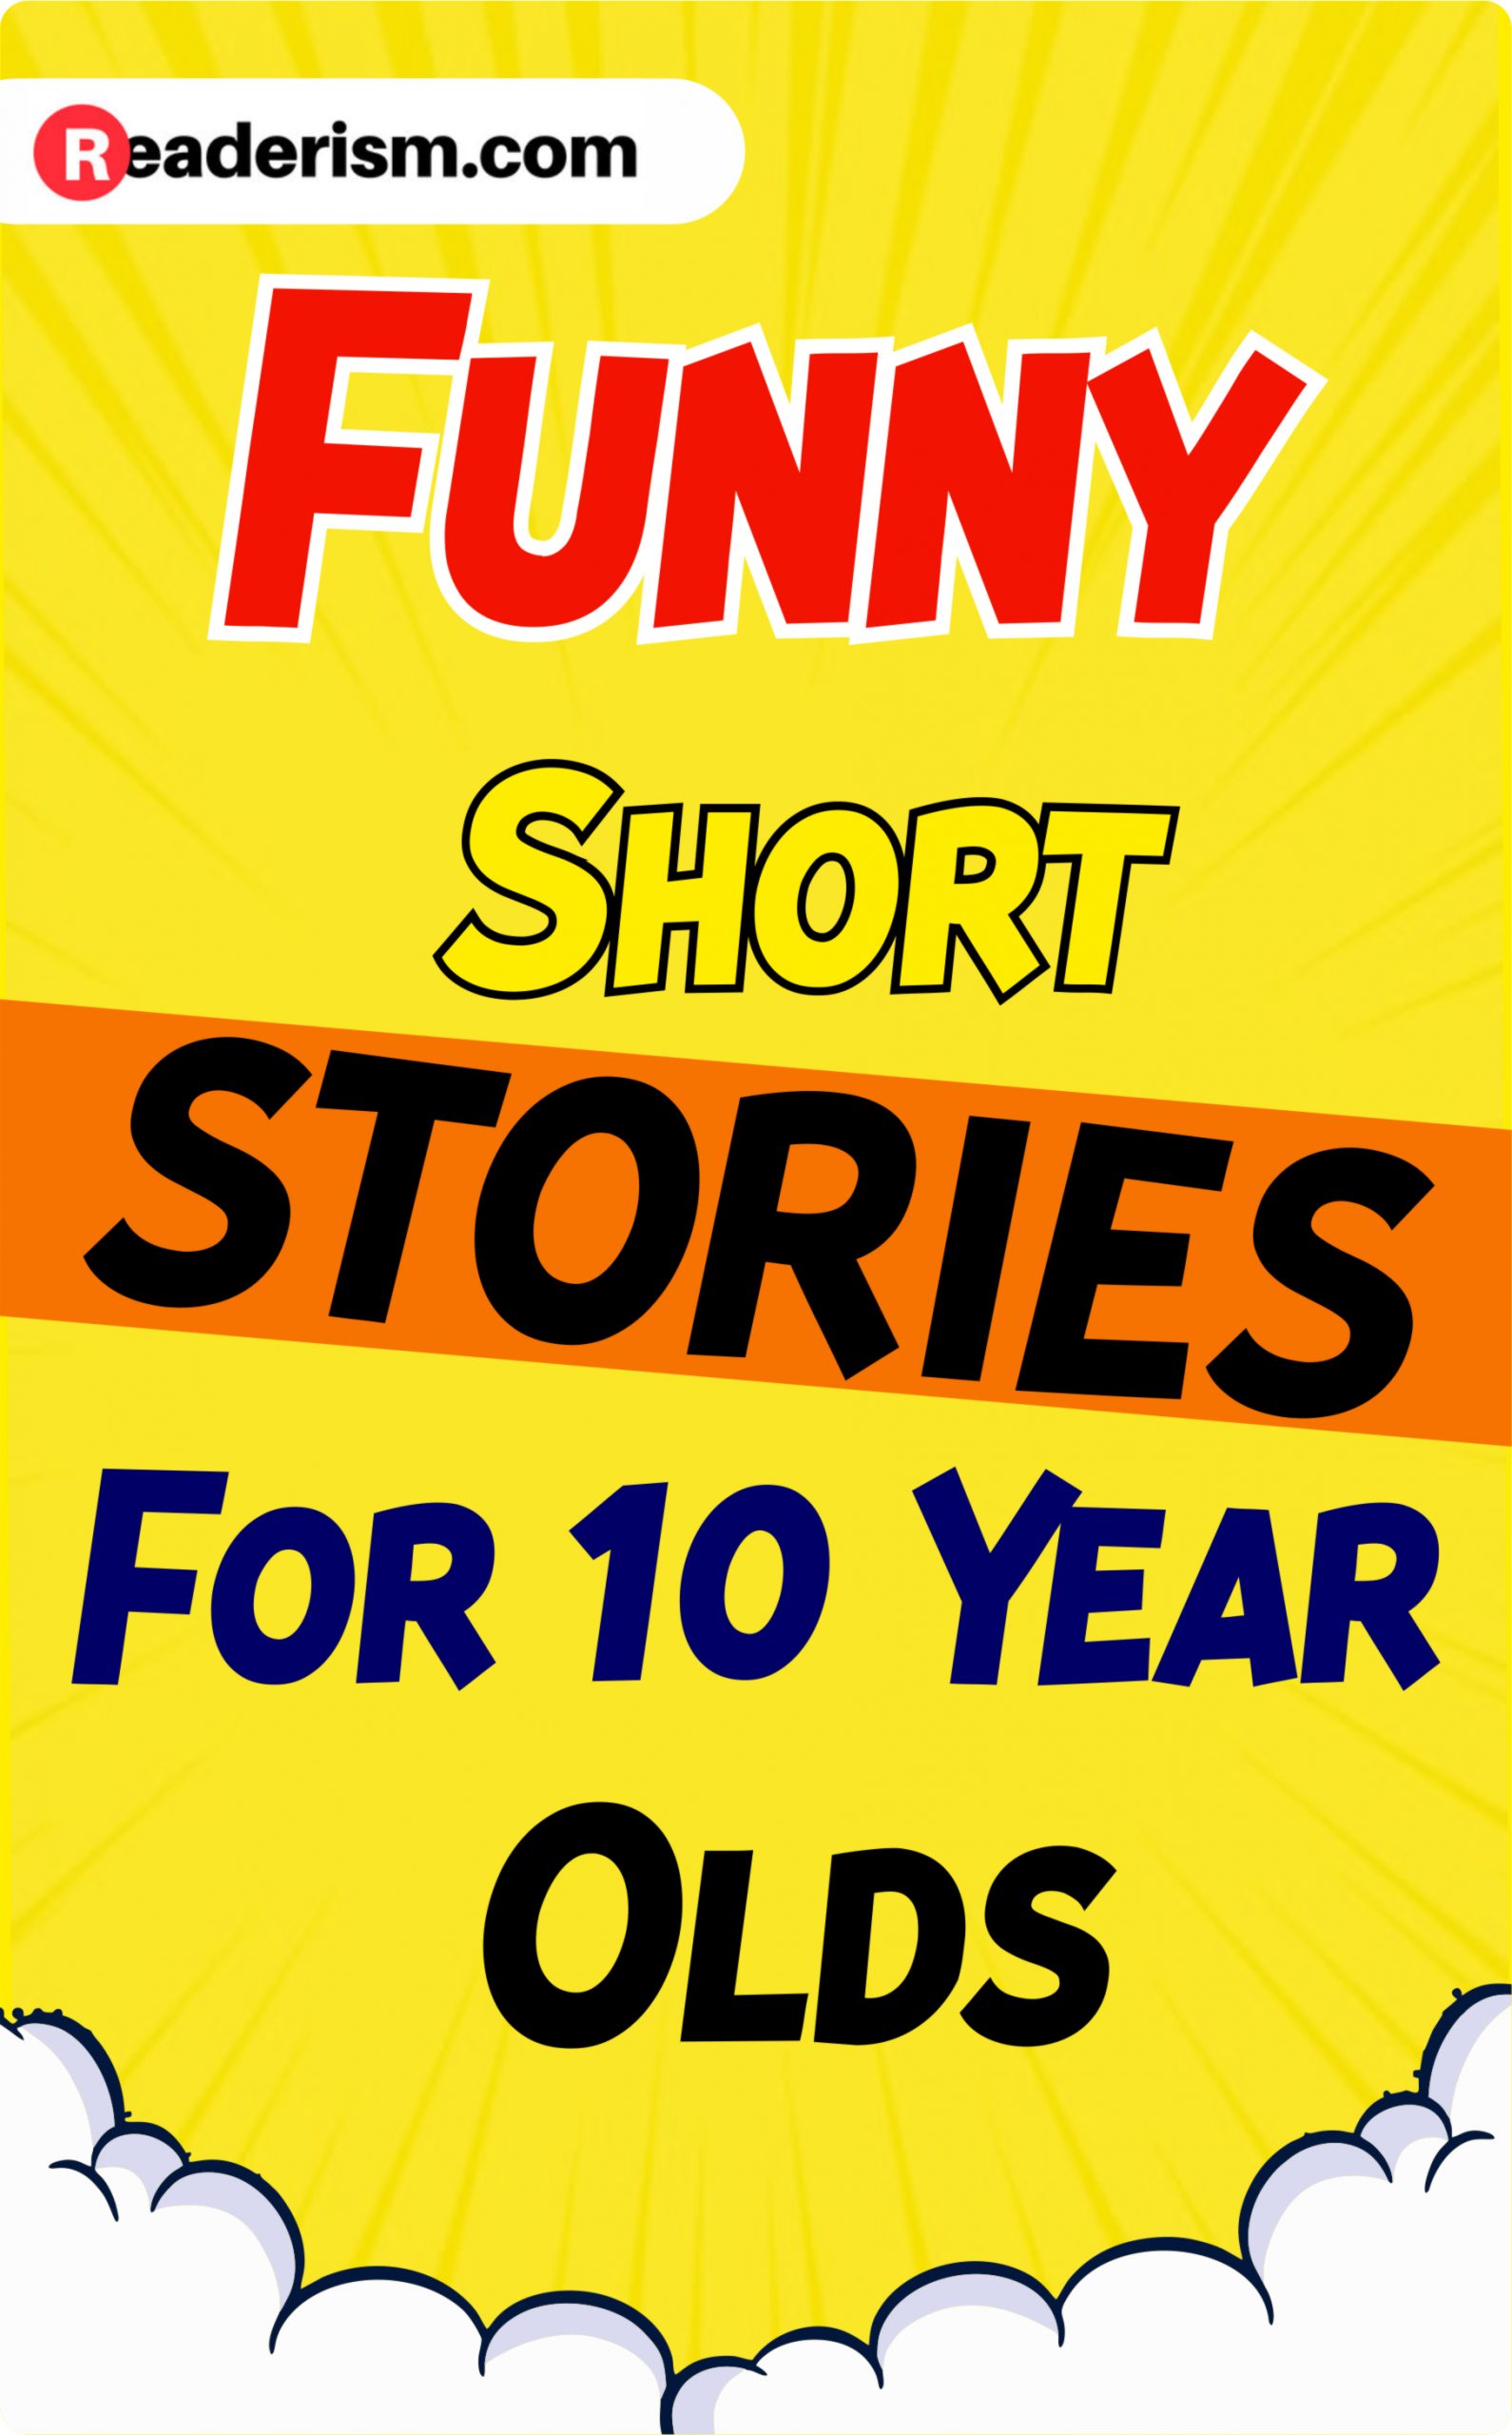 Funny Short Stories For 10 Year Olds